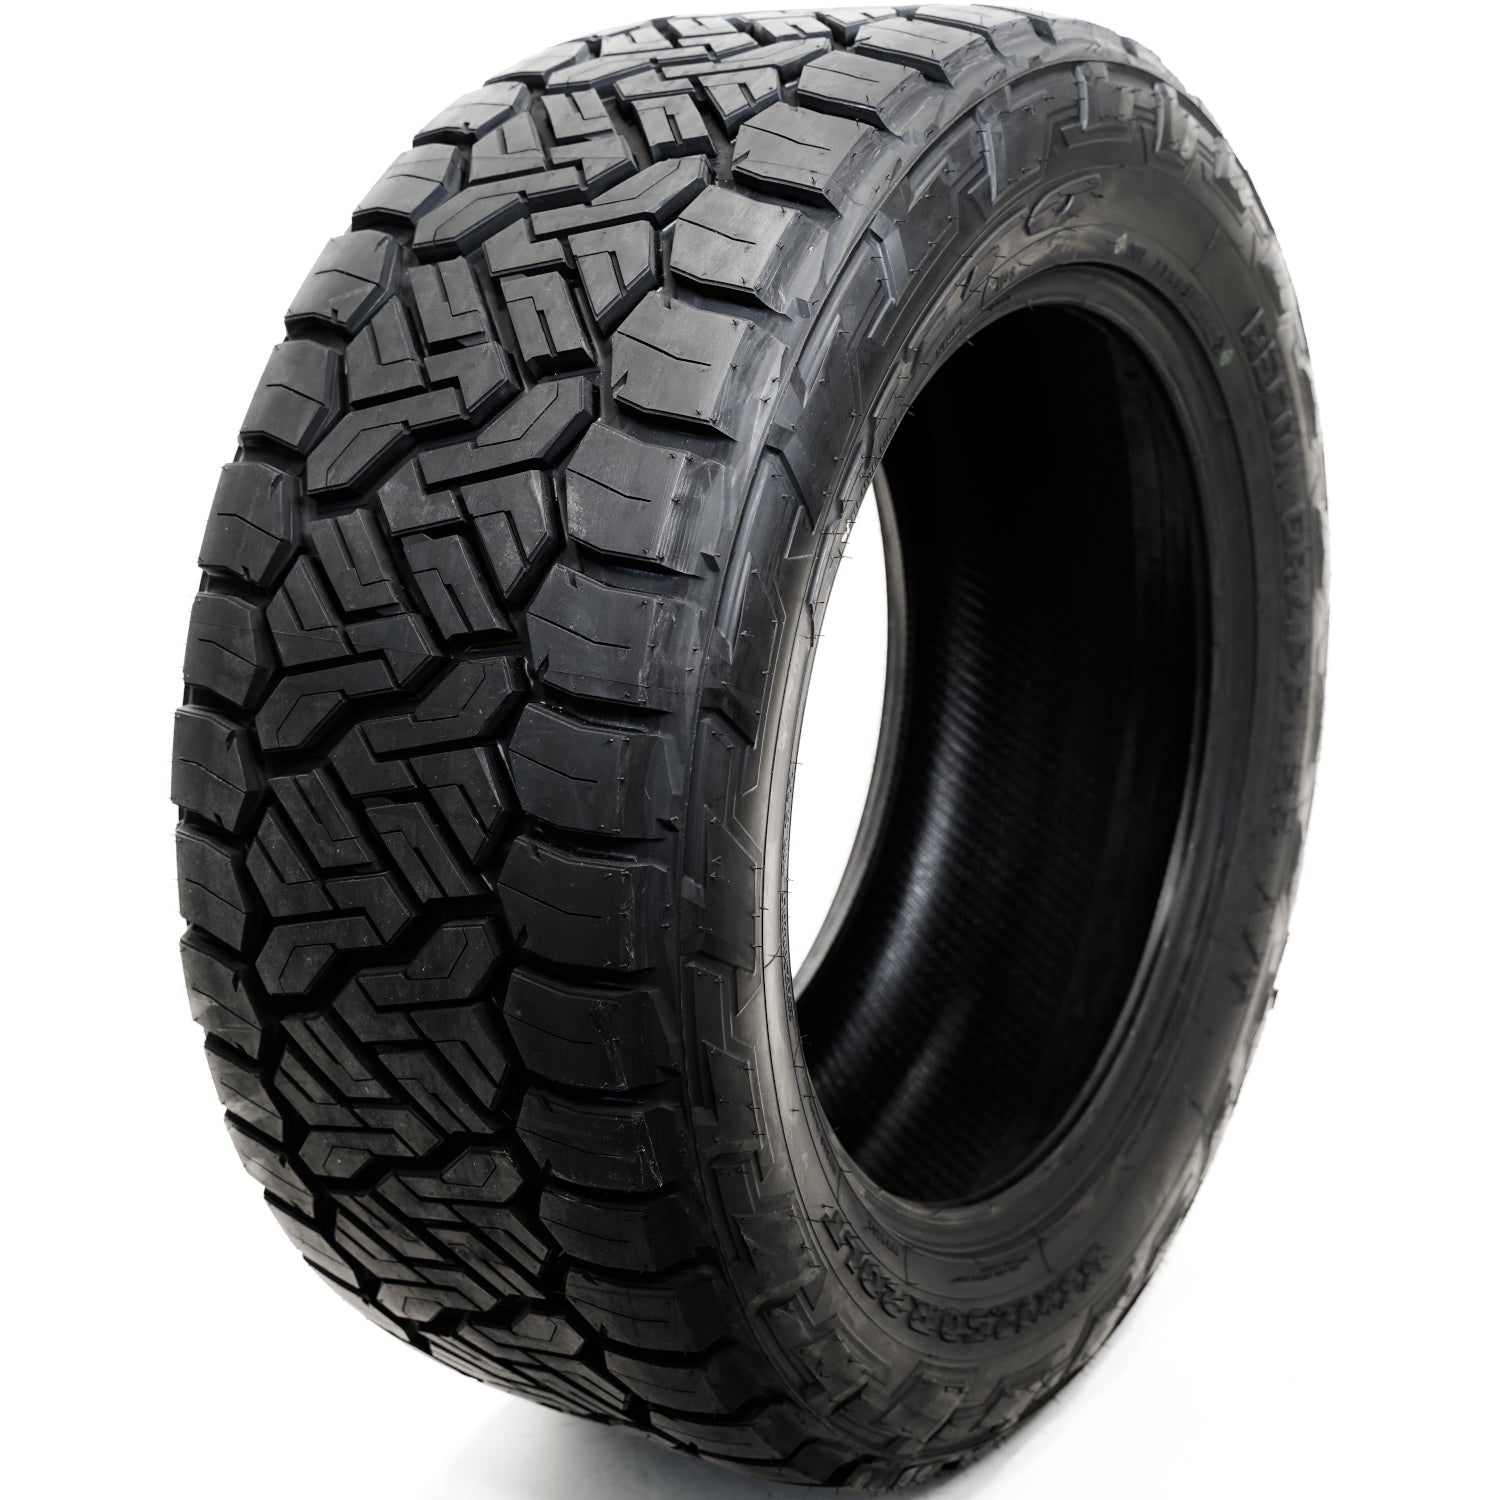 NITTO RECON GRAPPLER A/T LT315/75R16 (34.6X12.4R 16) Tires